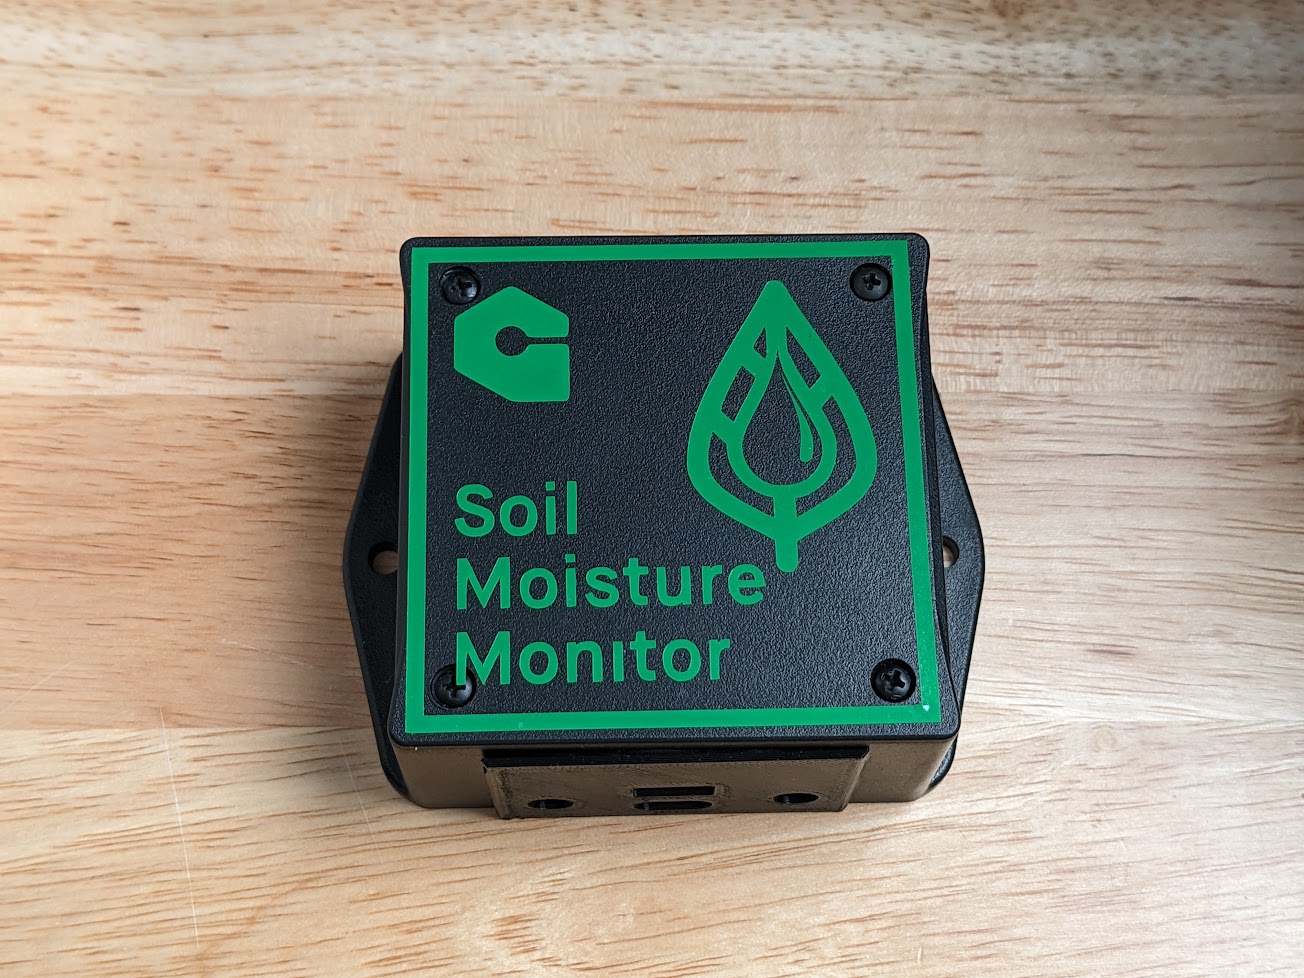 Soil Moisture Monitor case closed lid with sticker